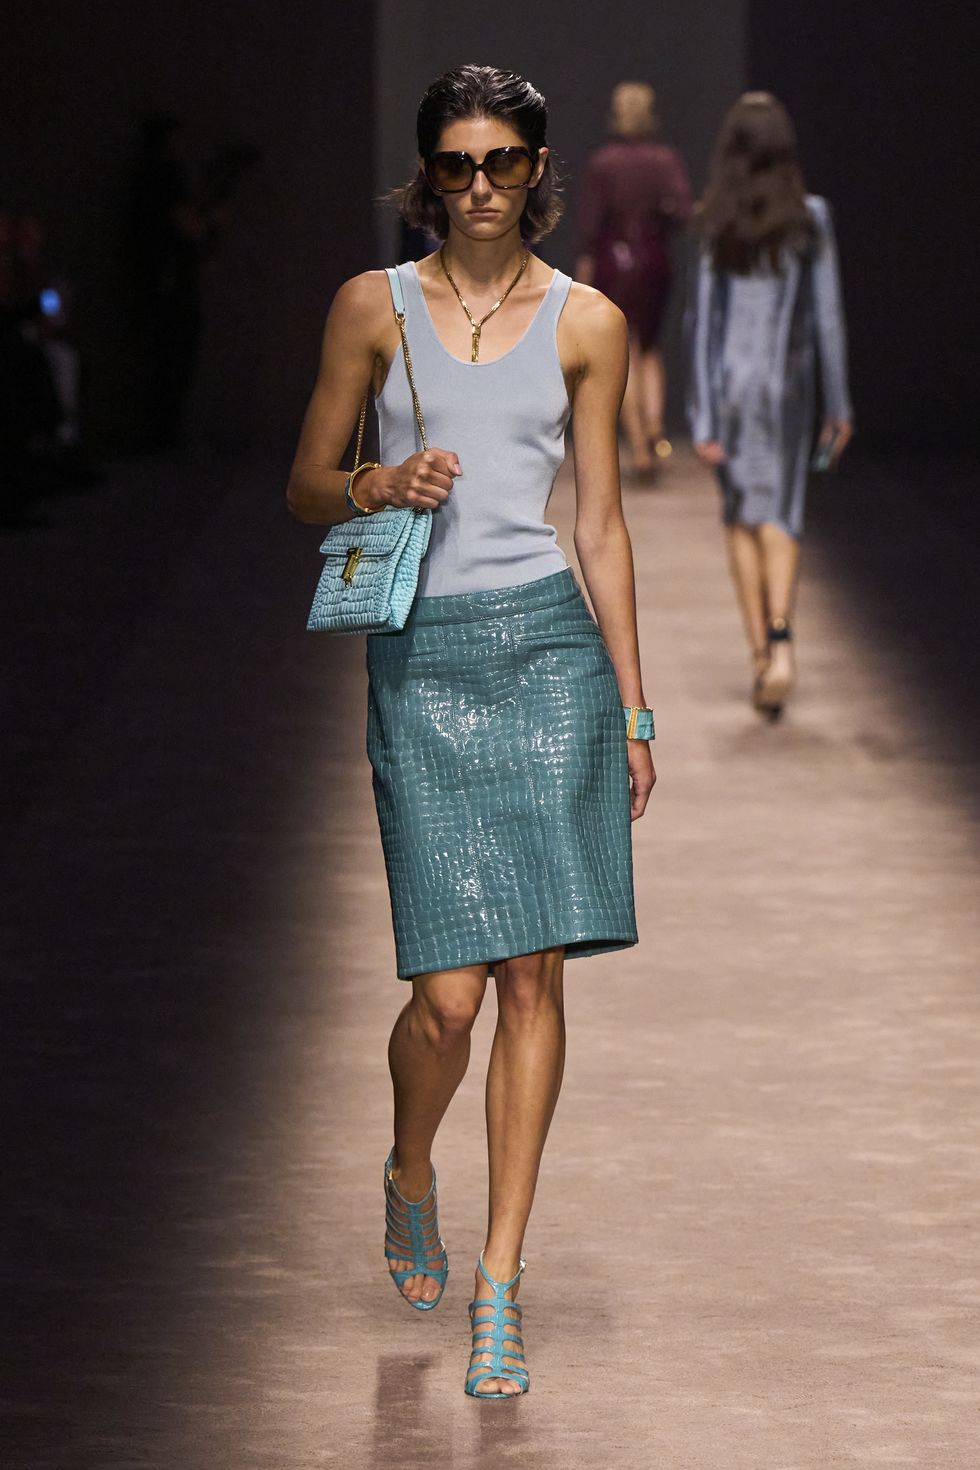 a woman wearing a blue dress and sunglasses walking on a runway